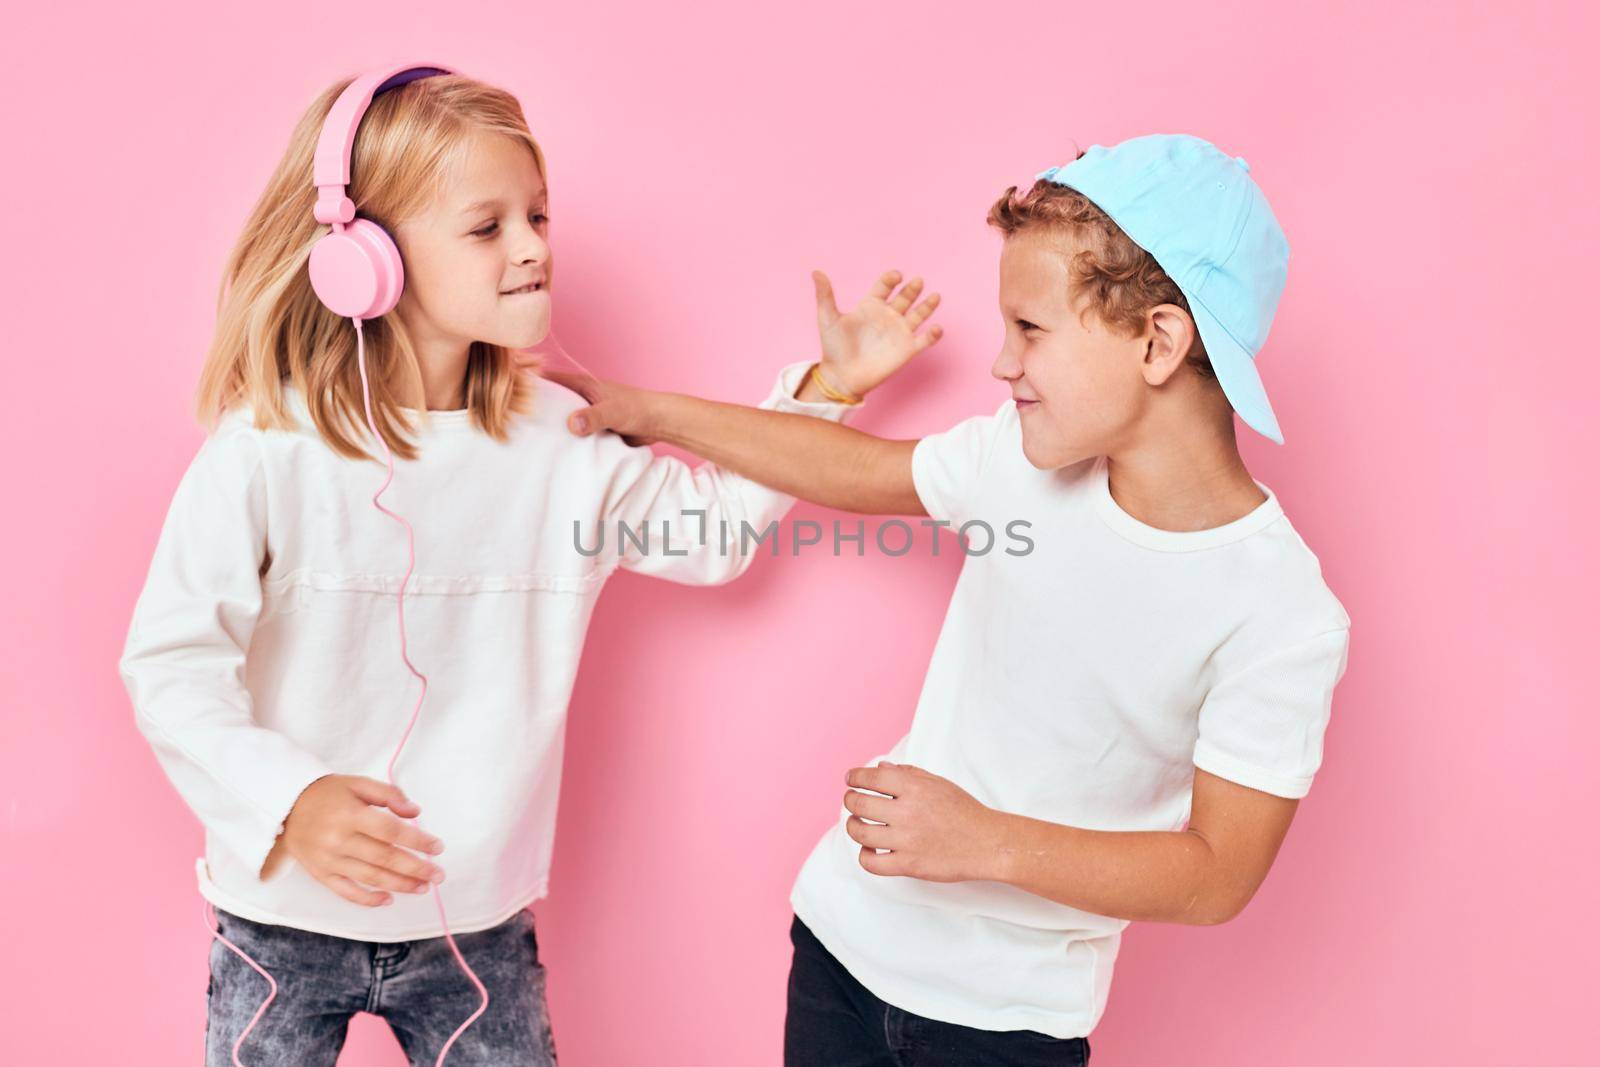 Stylish little boy and cute girl together fun posing pink color background. High quality photo